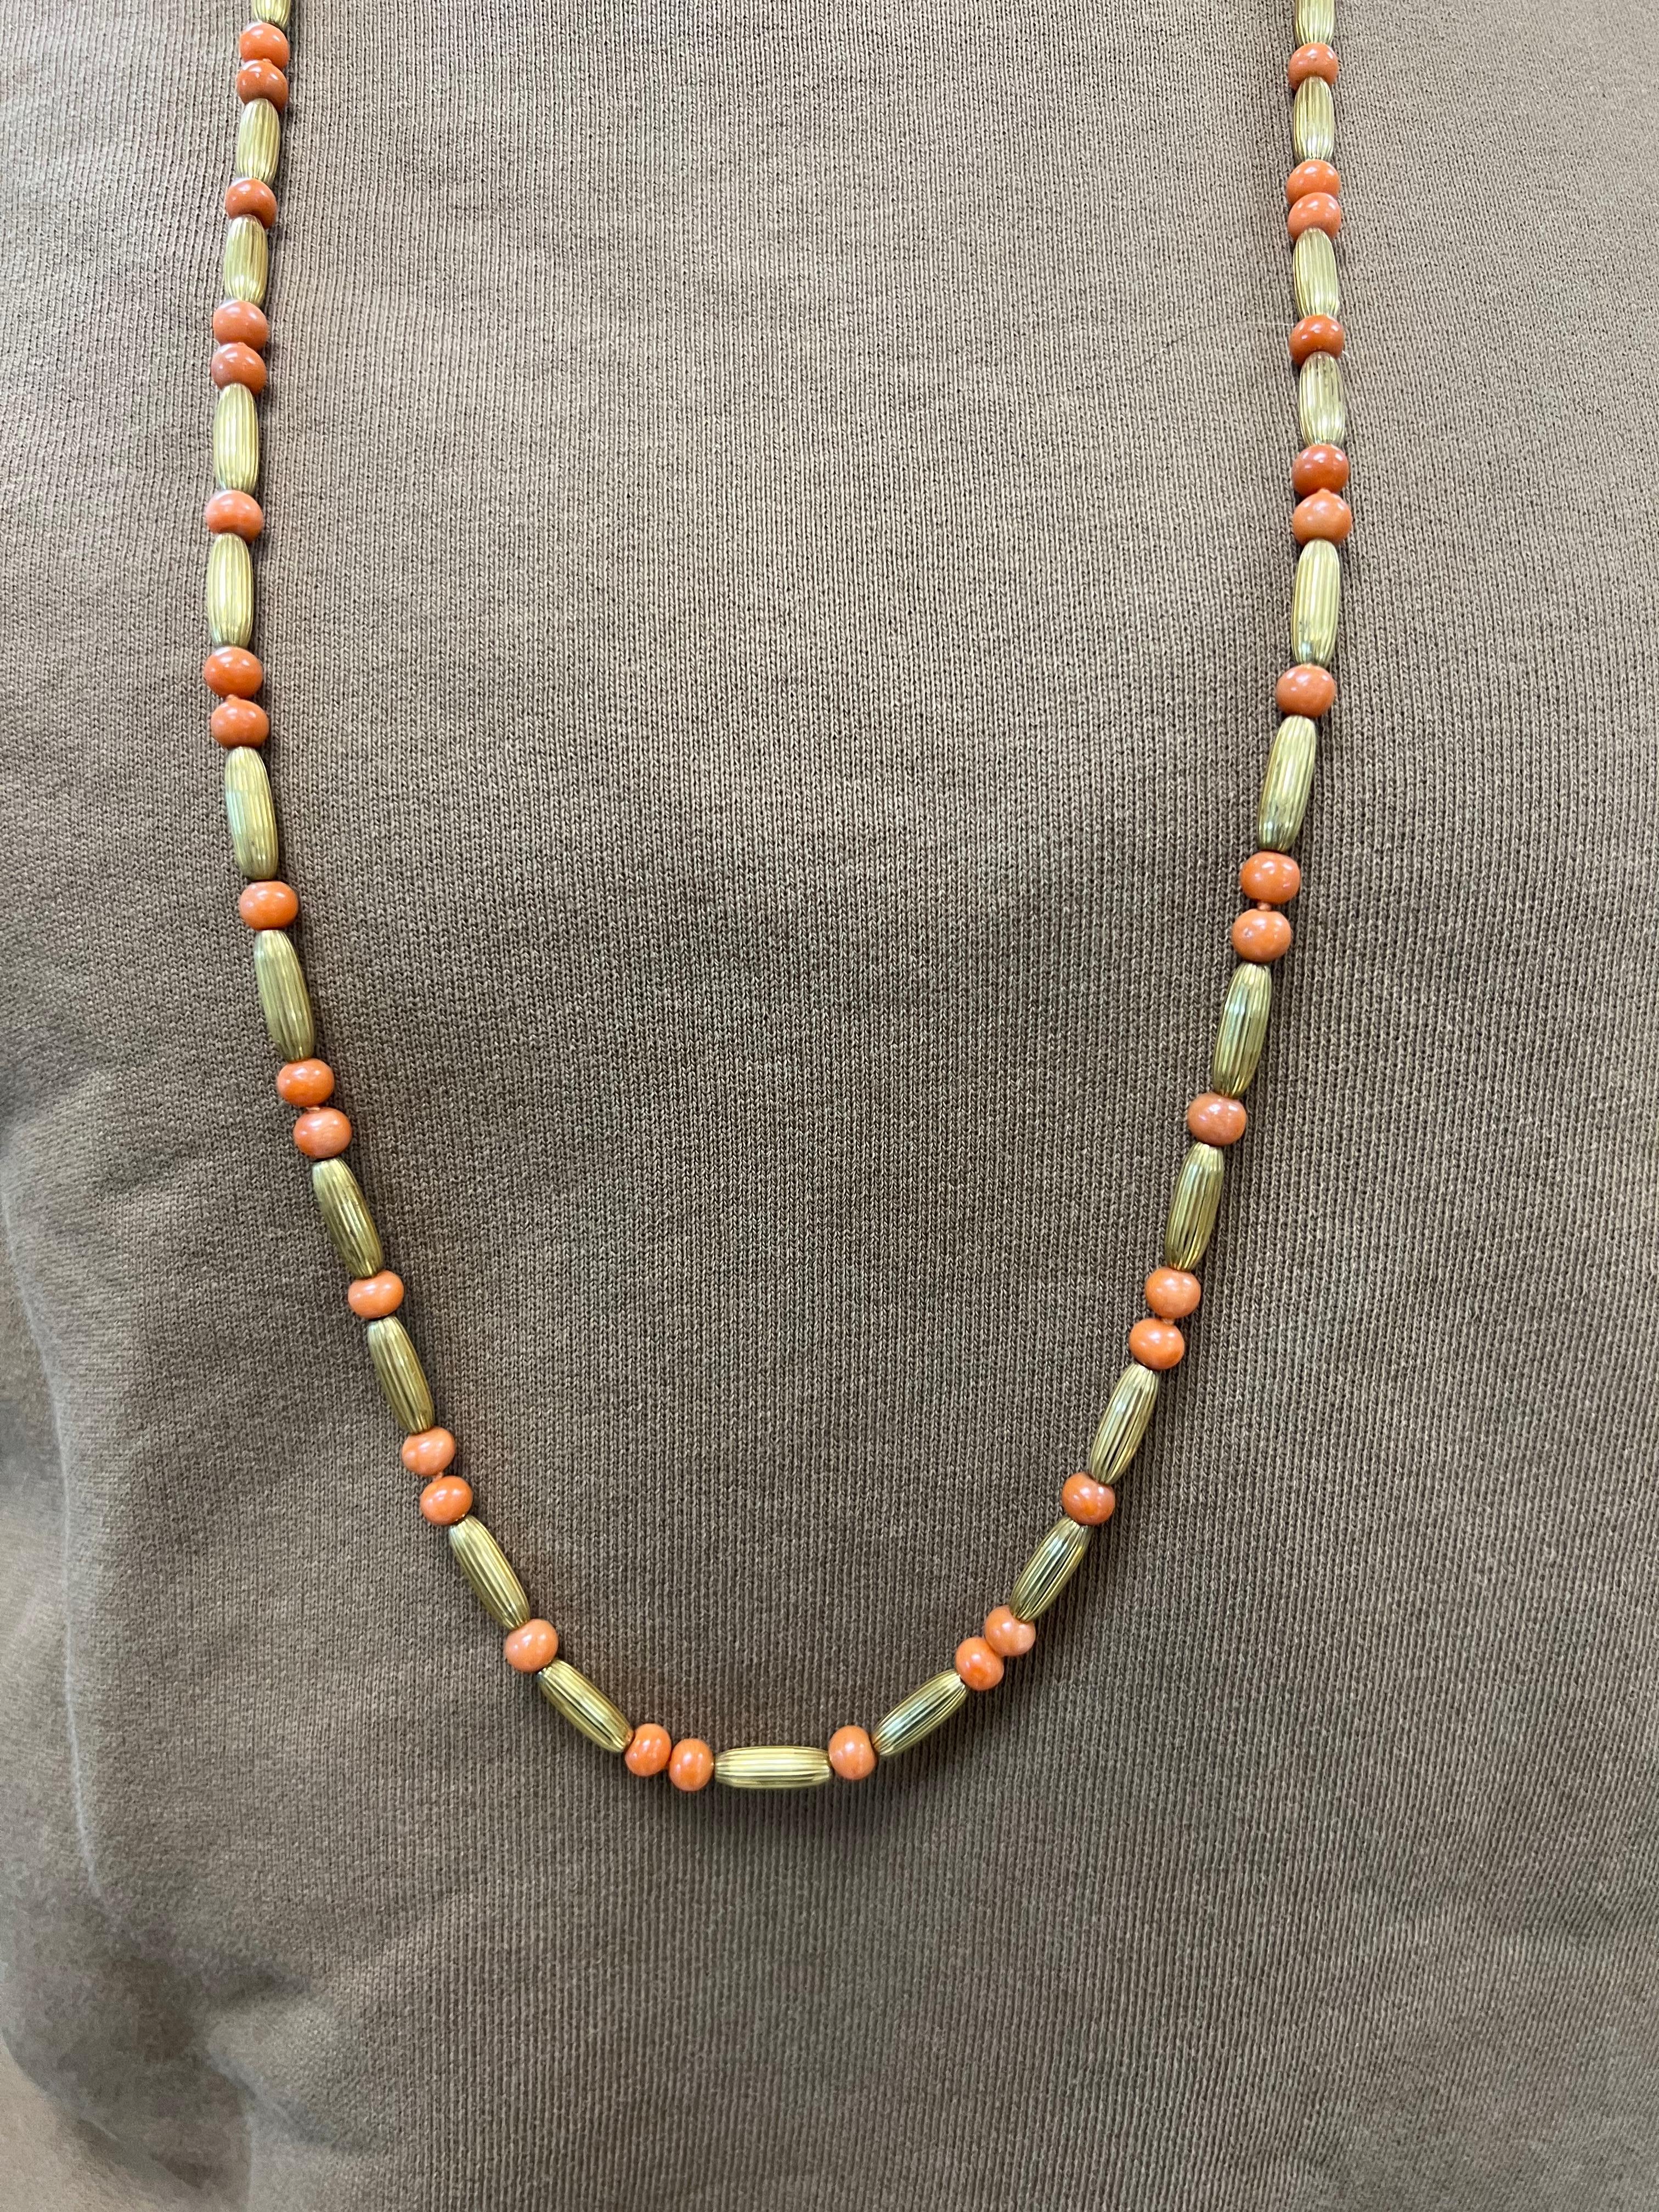 Coral Necklace 14k Gold, Circa 1970s For Sale 3